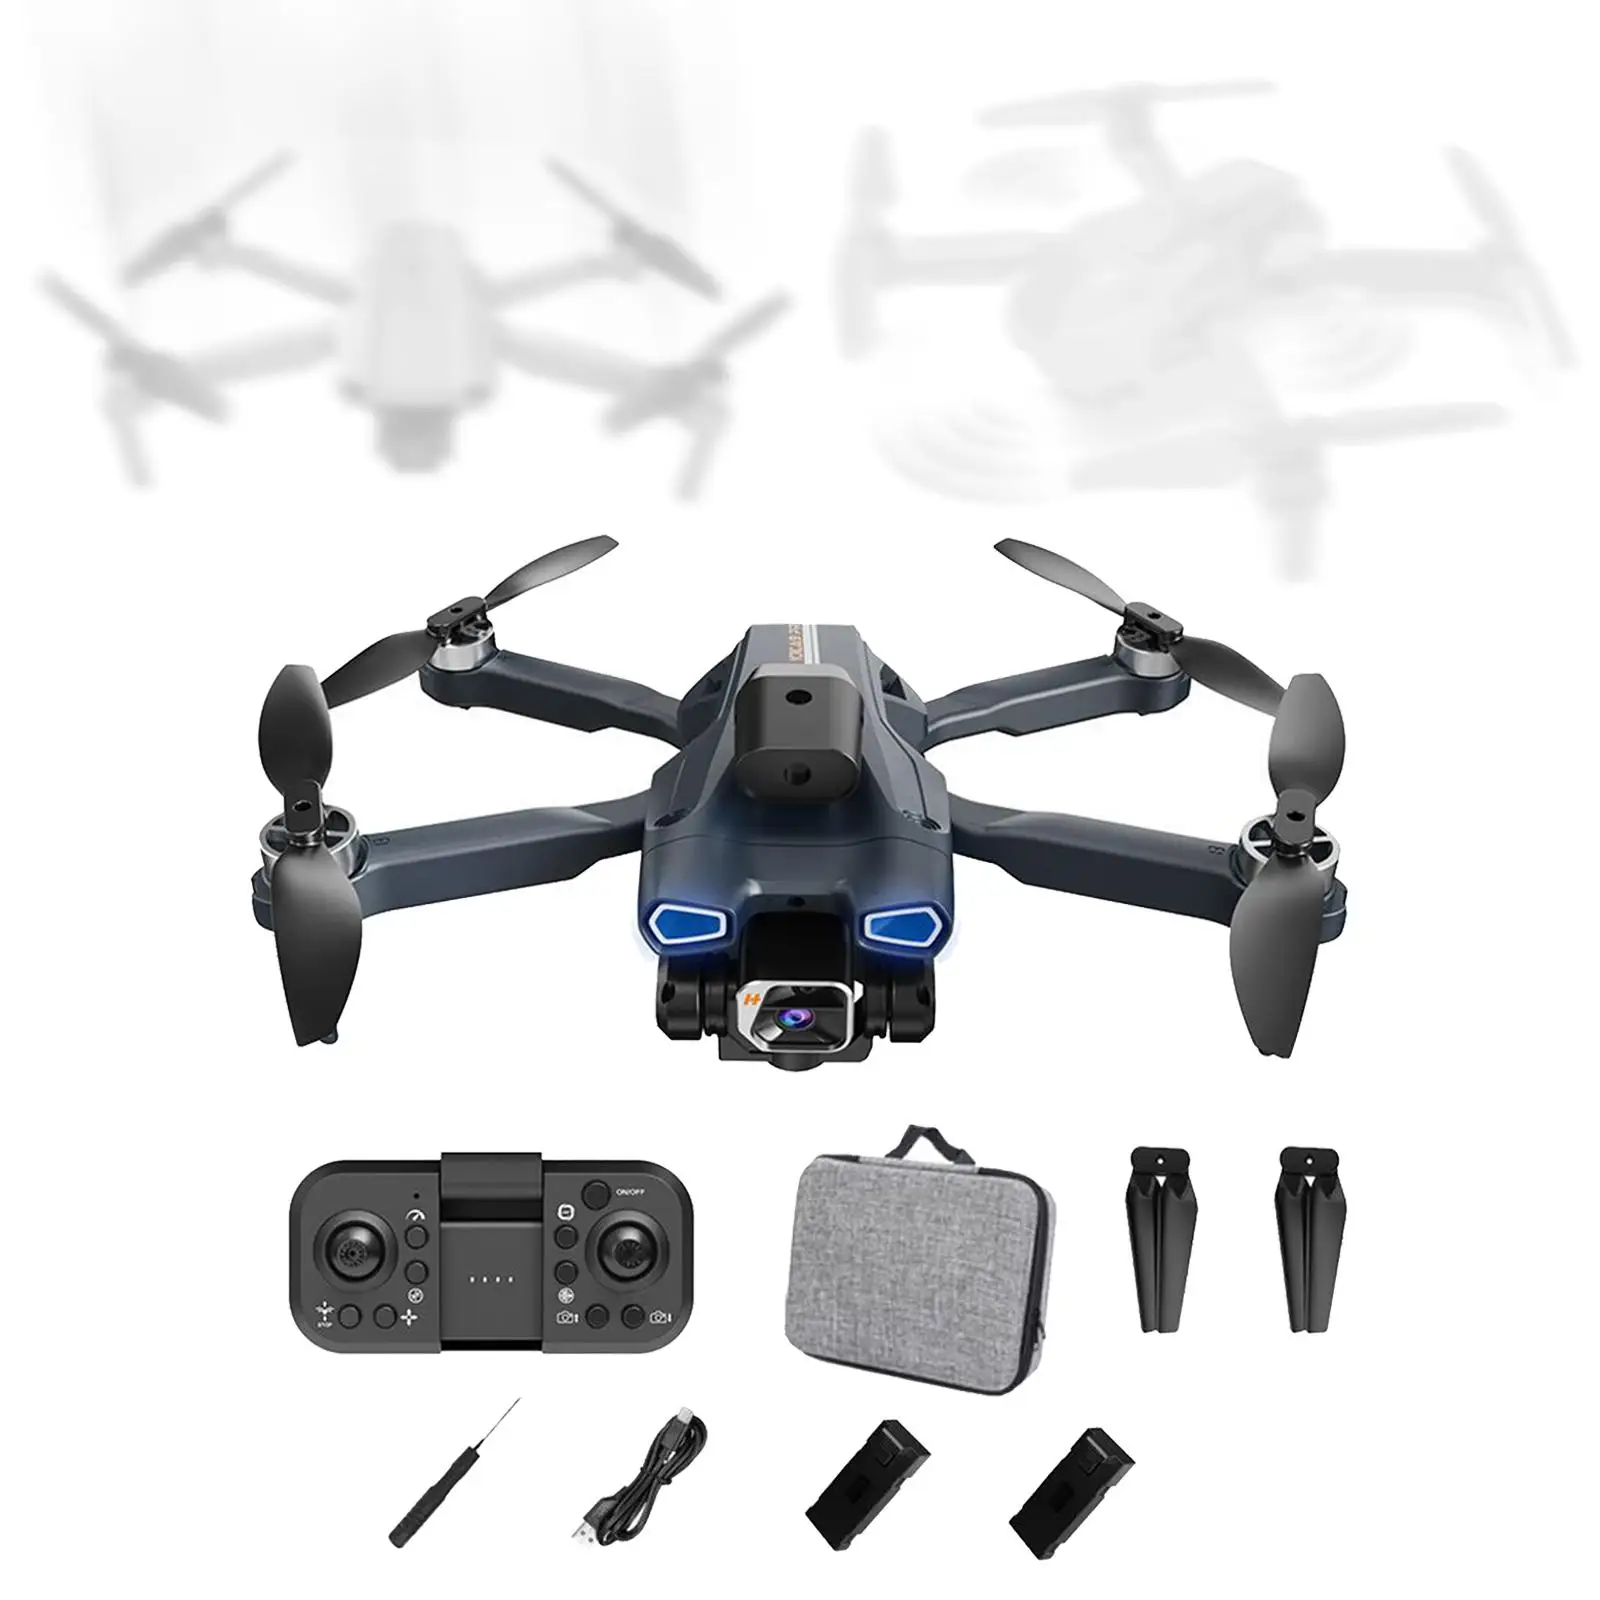 Pocket RC Aircraft Model 6 Channels 6 Axis Gyroscope 15 Flying Time Strong Brushless Motor Foldable Drone with 4K Camera